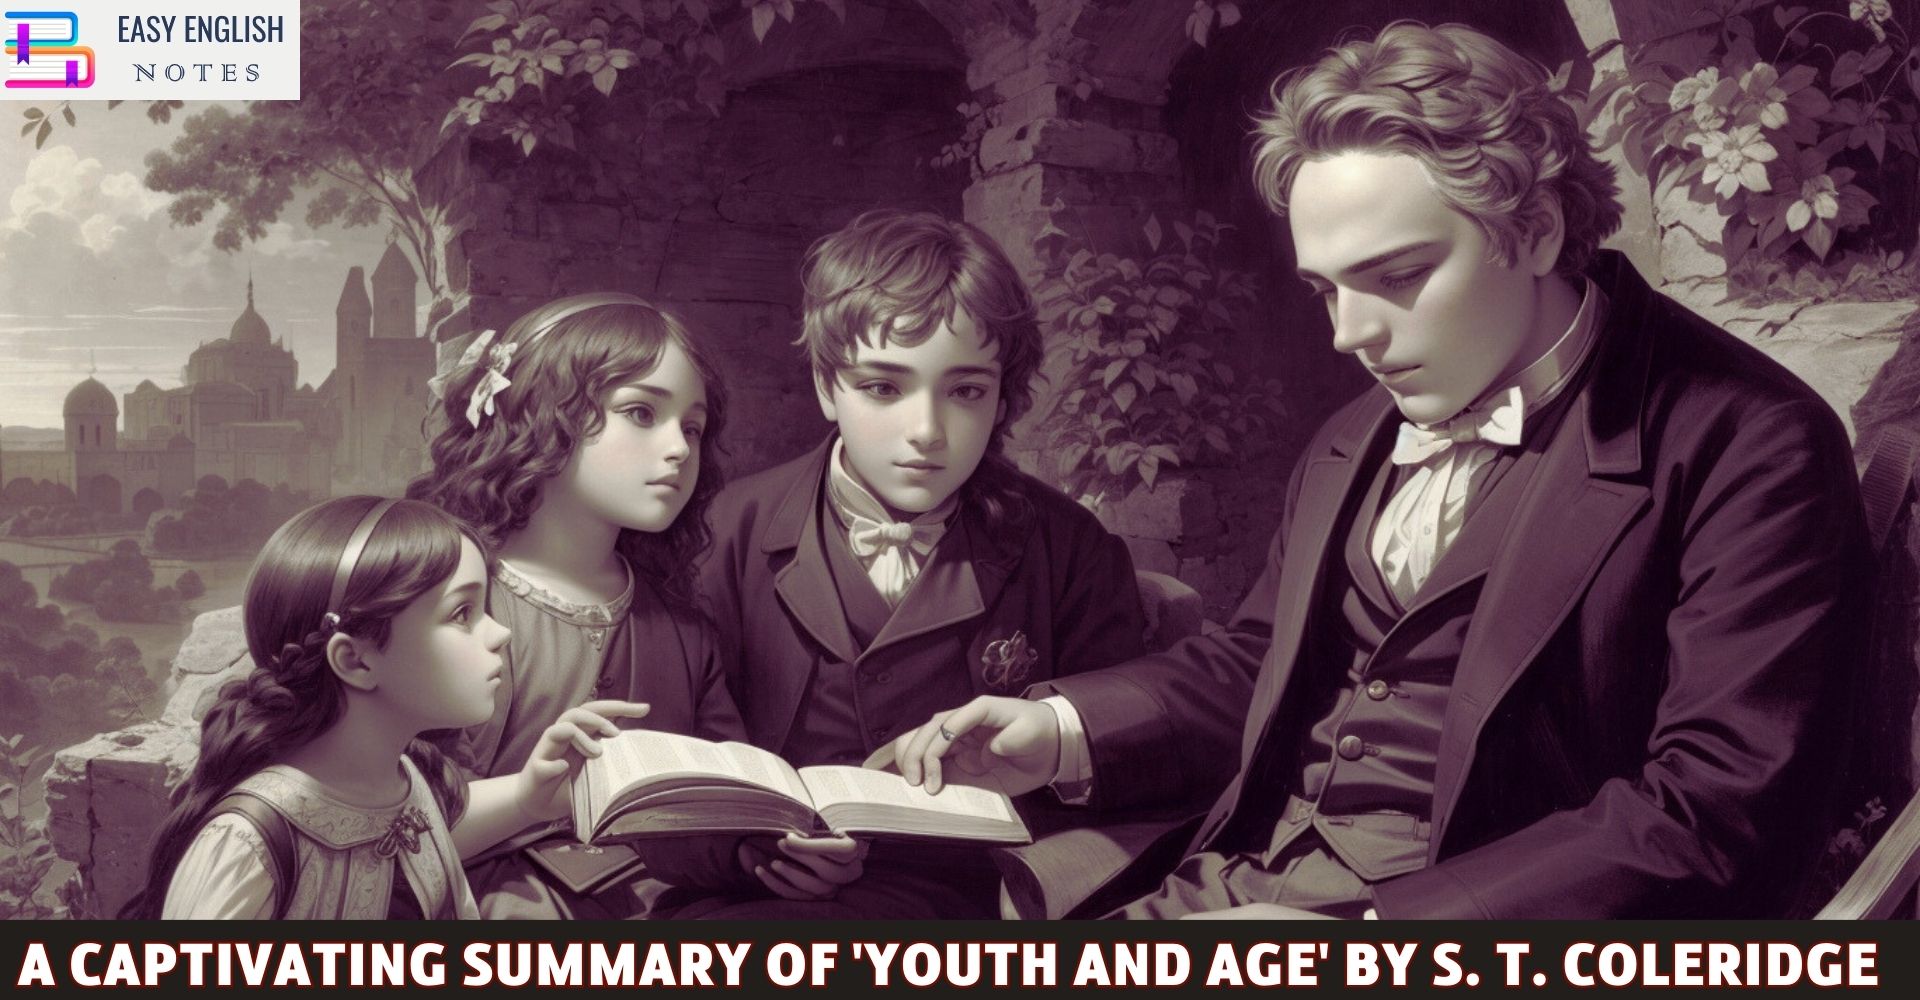 A Captivating Summary of 'Youth and Age' by S. T. Coleridge